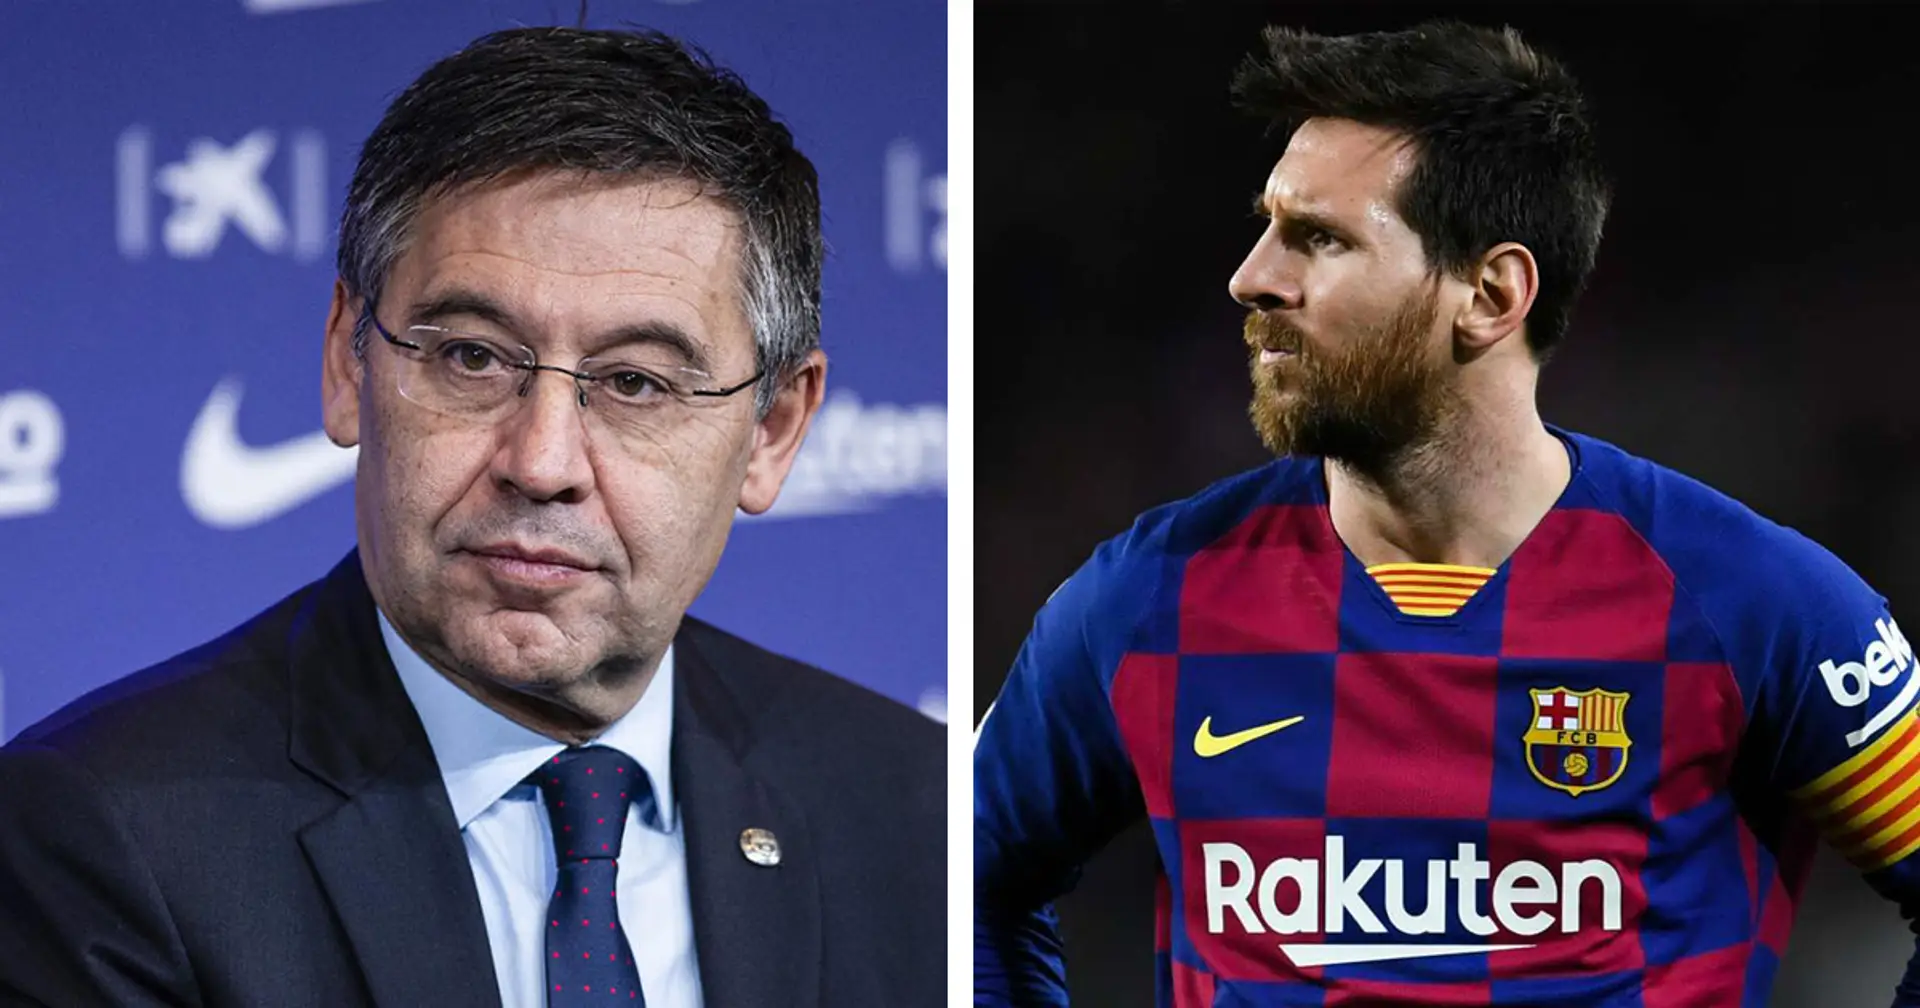 What exactly led to Josep Maria Bartomeu's arrest? BarcaGate explained